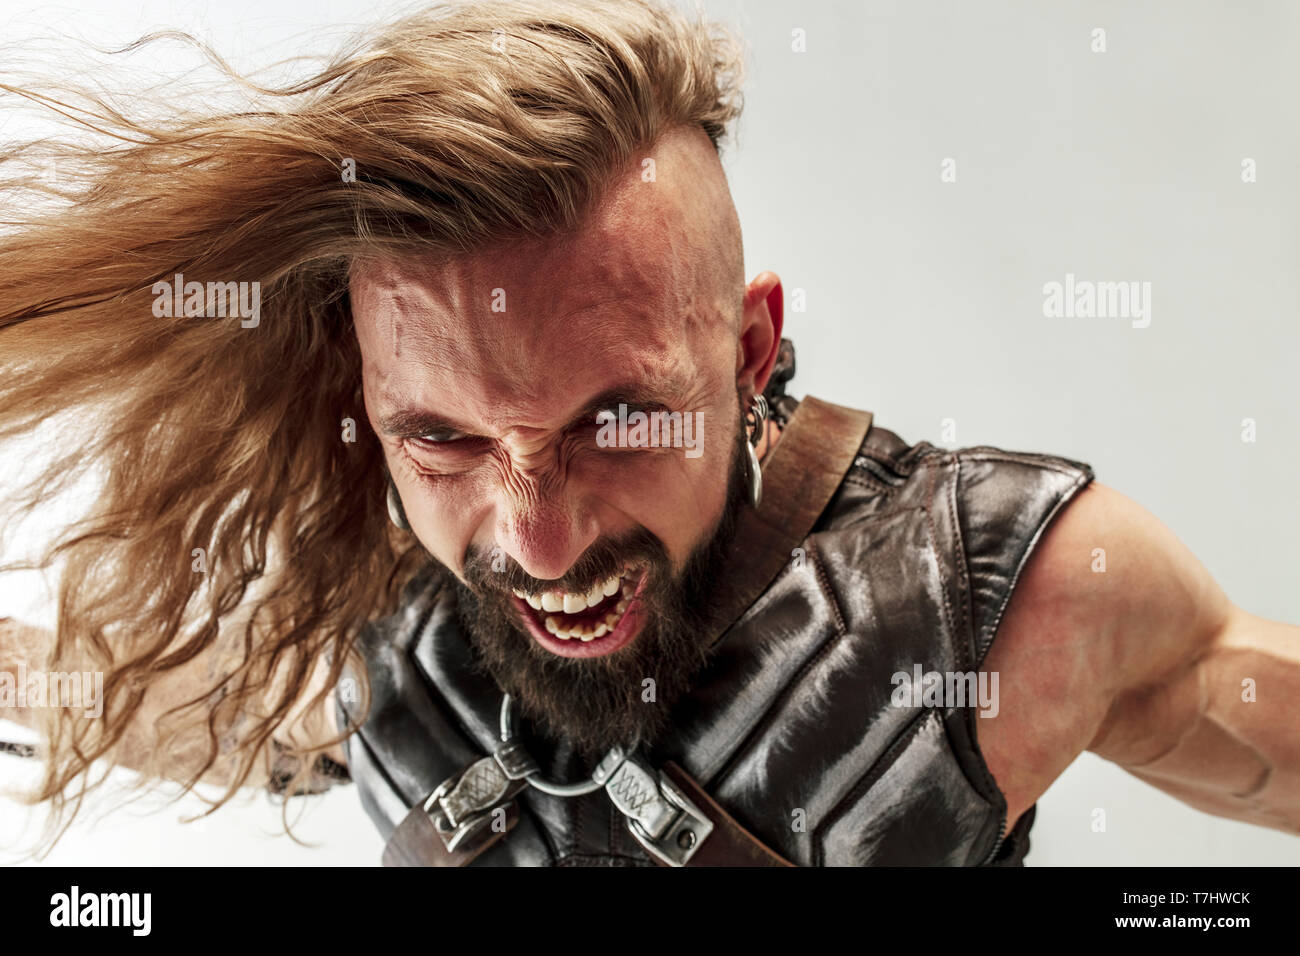 God Of Thunder Blonde Long Hair And Muscular Male Model In Leather Viking S Costume With The Big Hammer Cosplaying Thor Isolated On White Studio Background Fantasy Warrior Antique Battle Concept Stock Photo